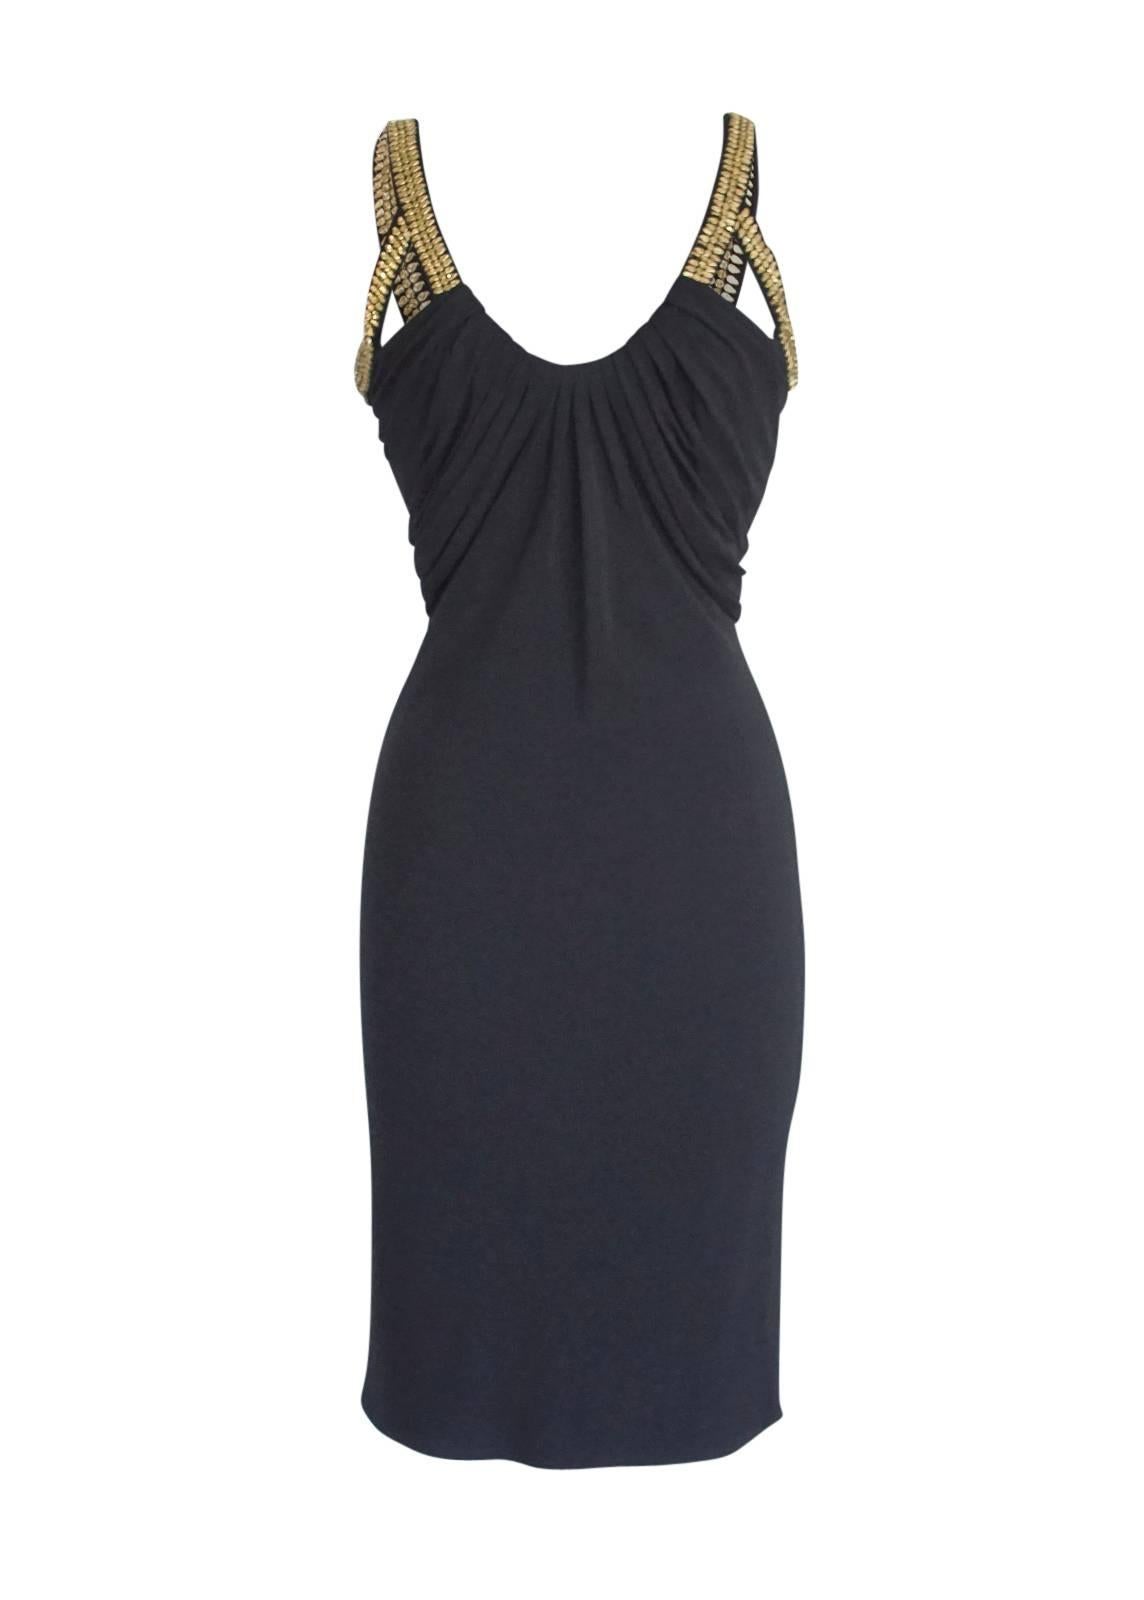 Versace Dress Gold Hardware Black pleated and Rouched  40 / 4 8